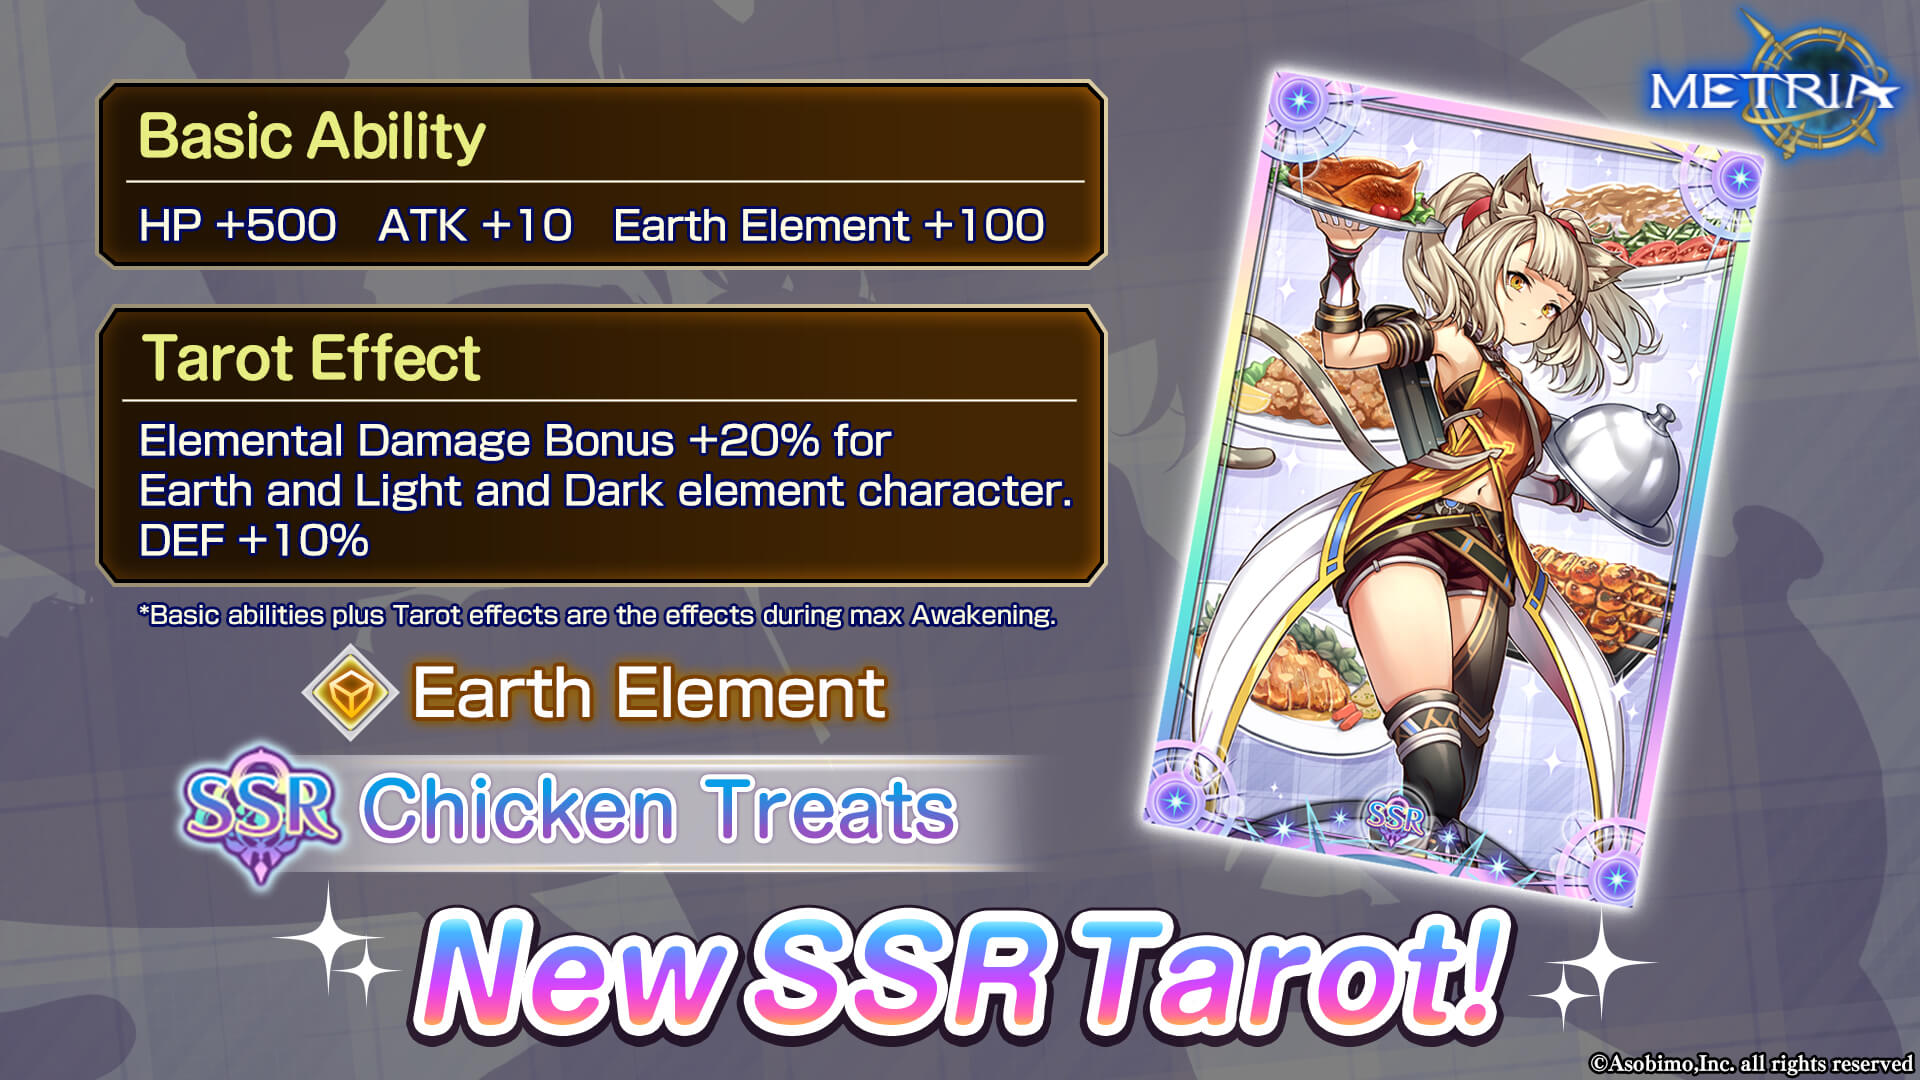 Earth Element New SSR Tarot: "Chicken Treats" Available for Purchase!